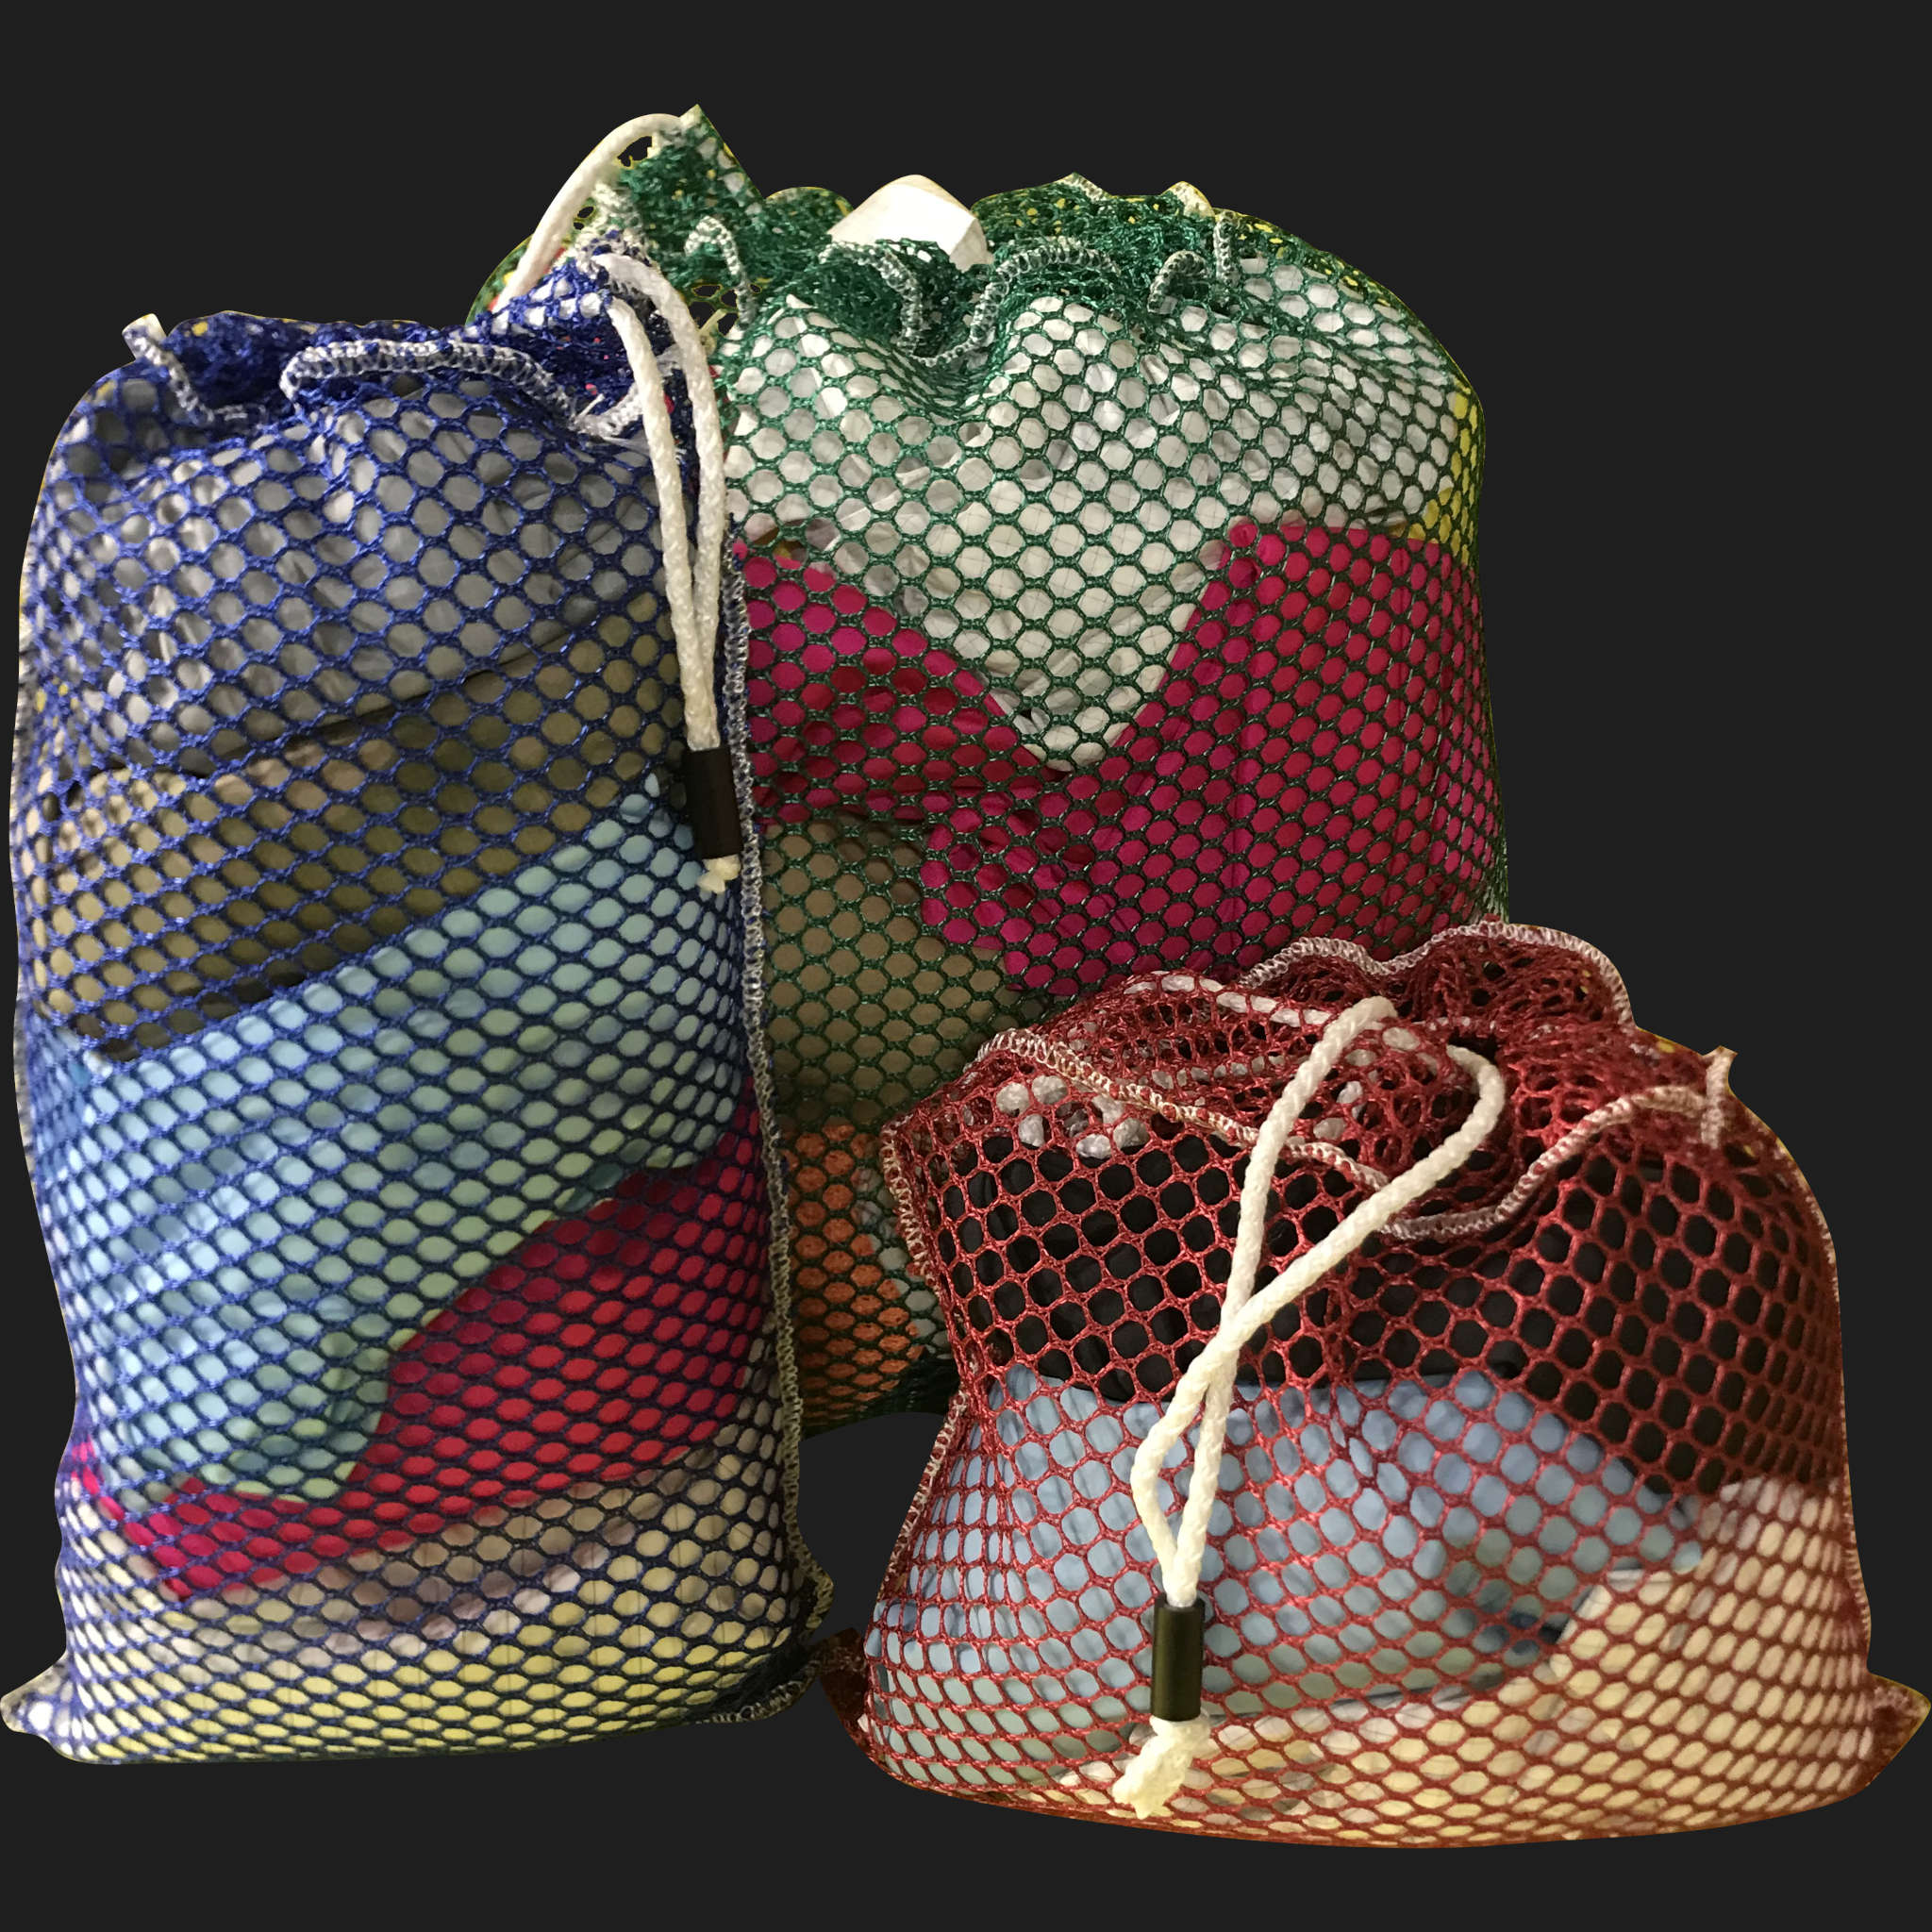 24" x 50" Customized Mesh-Net-Laundry Bags Heavy Duty with Cord and barrellock closure